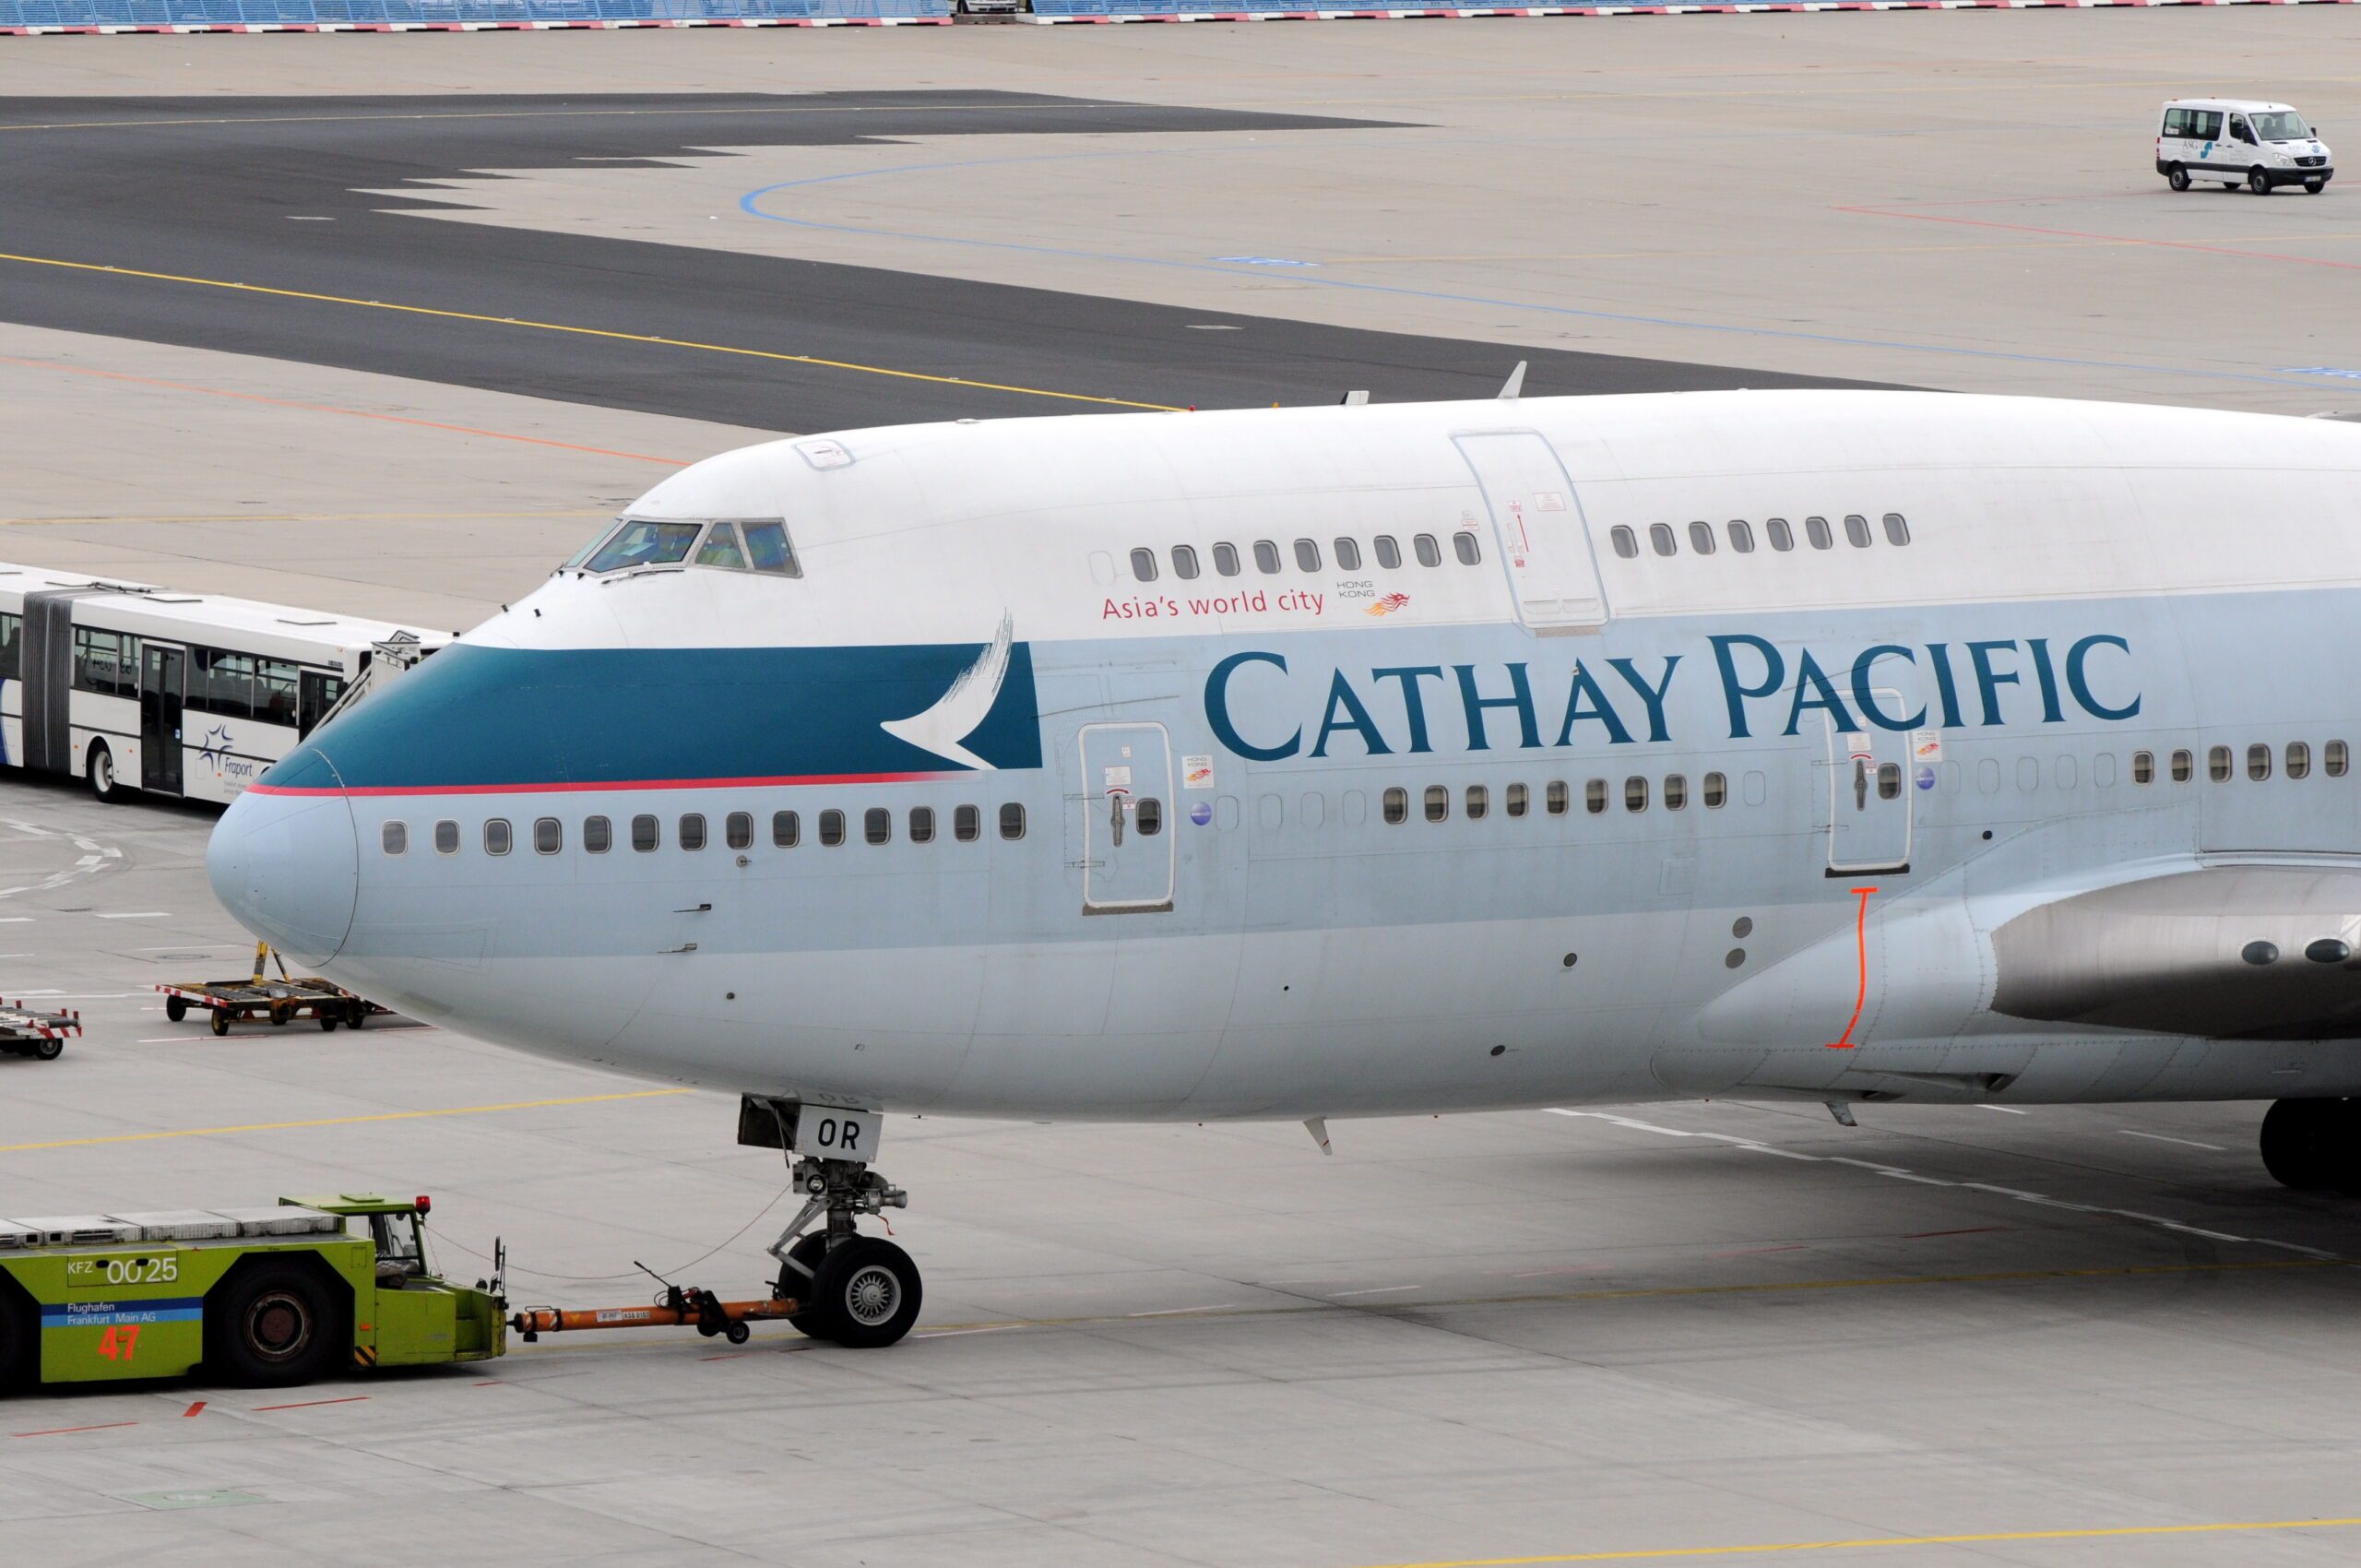 Cathay Pacific net profit soars thanks to dive in oil prices